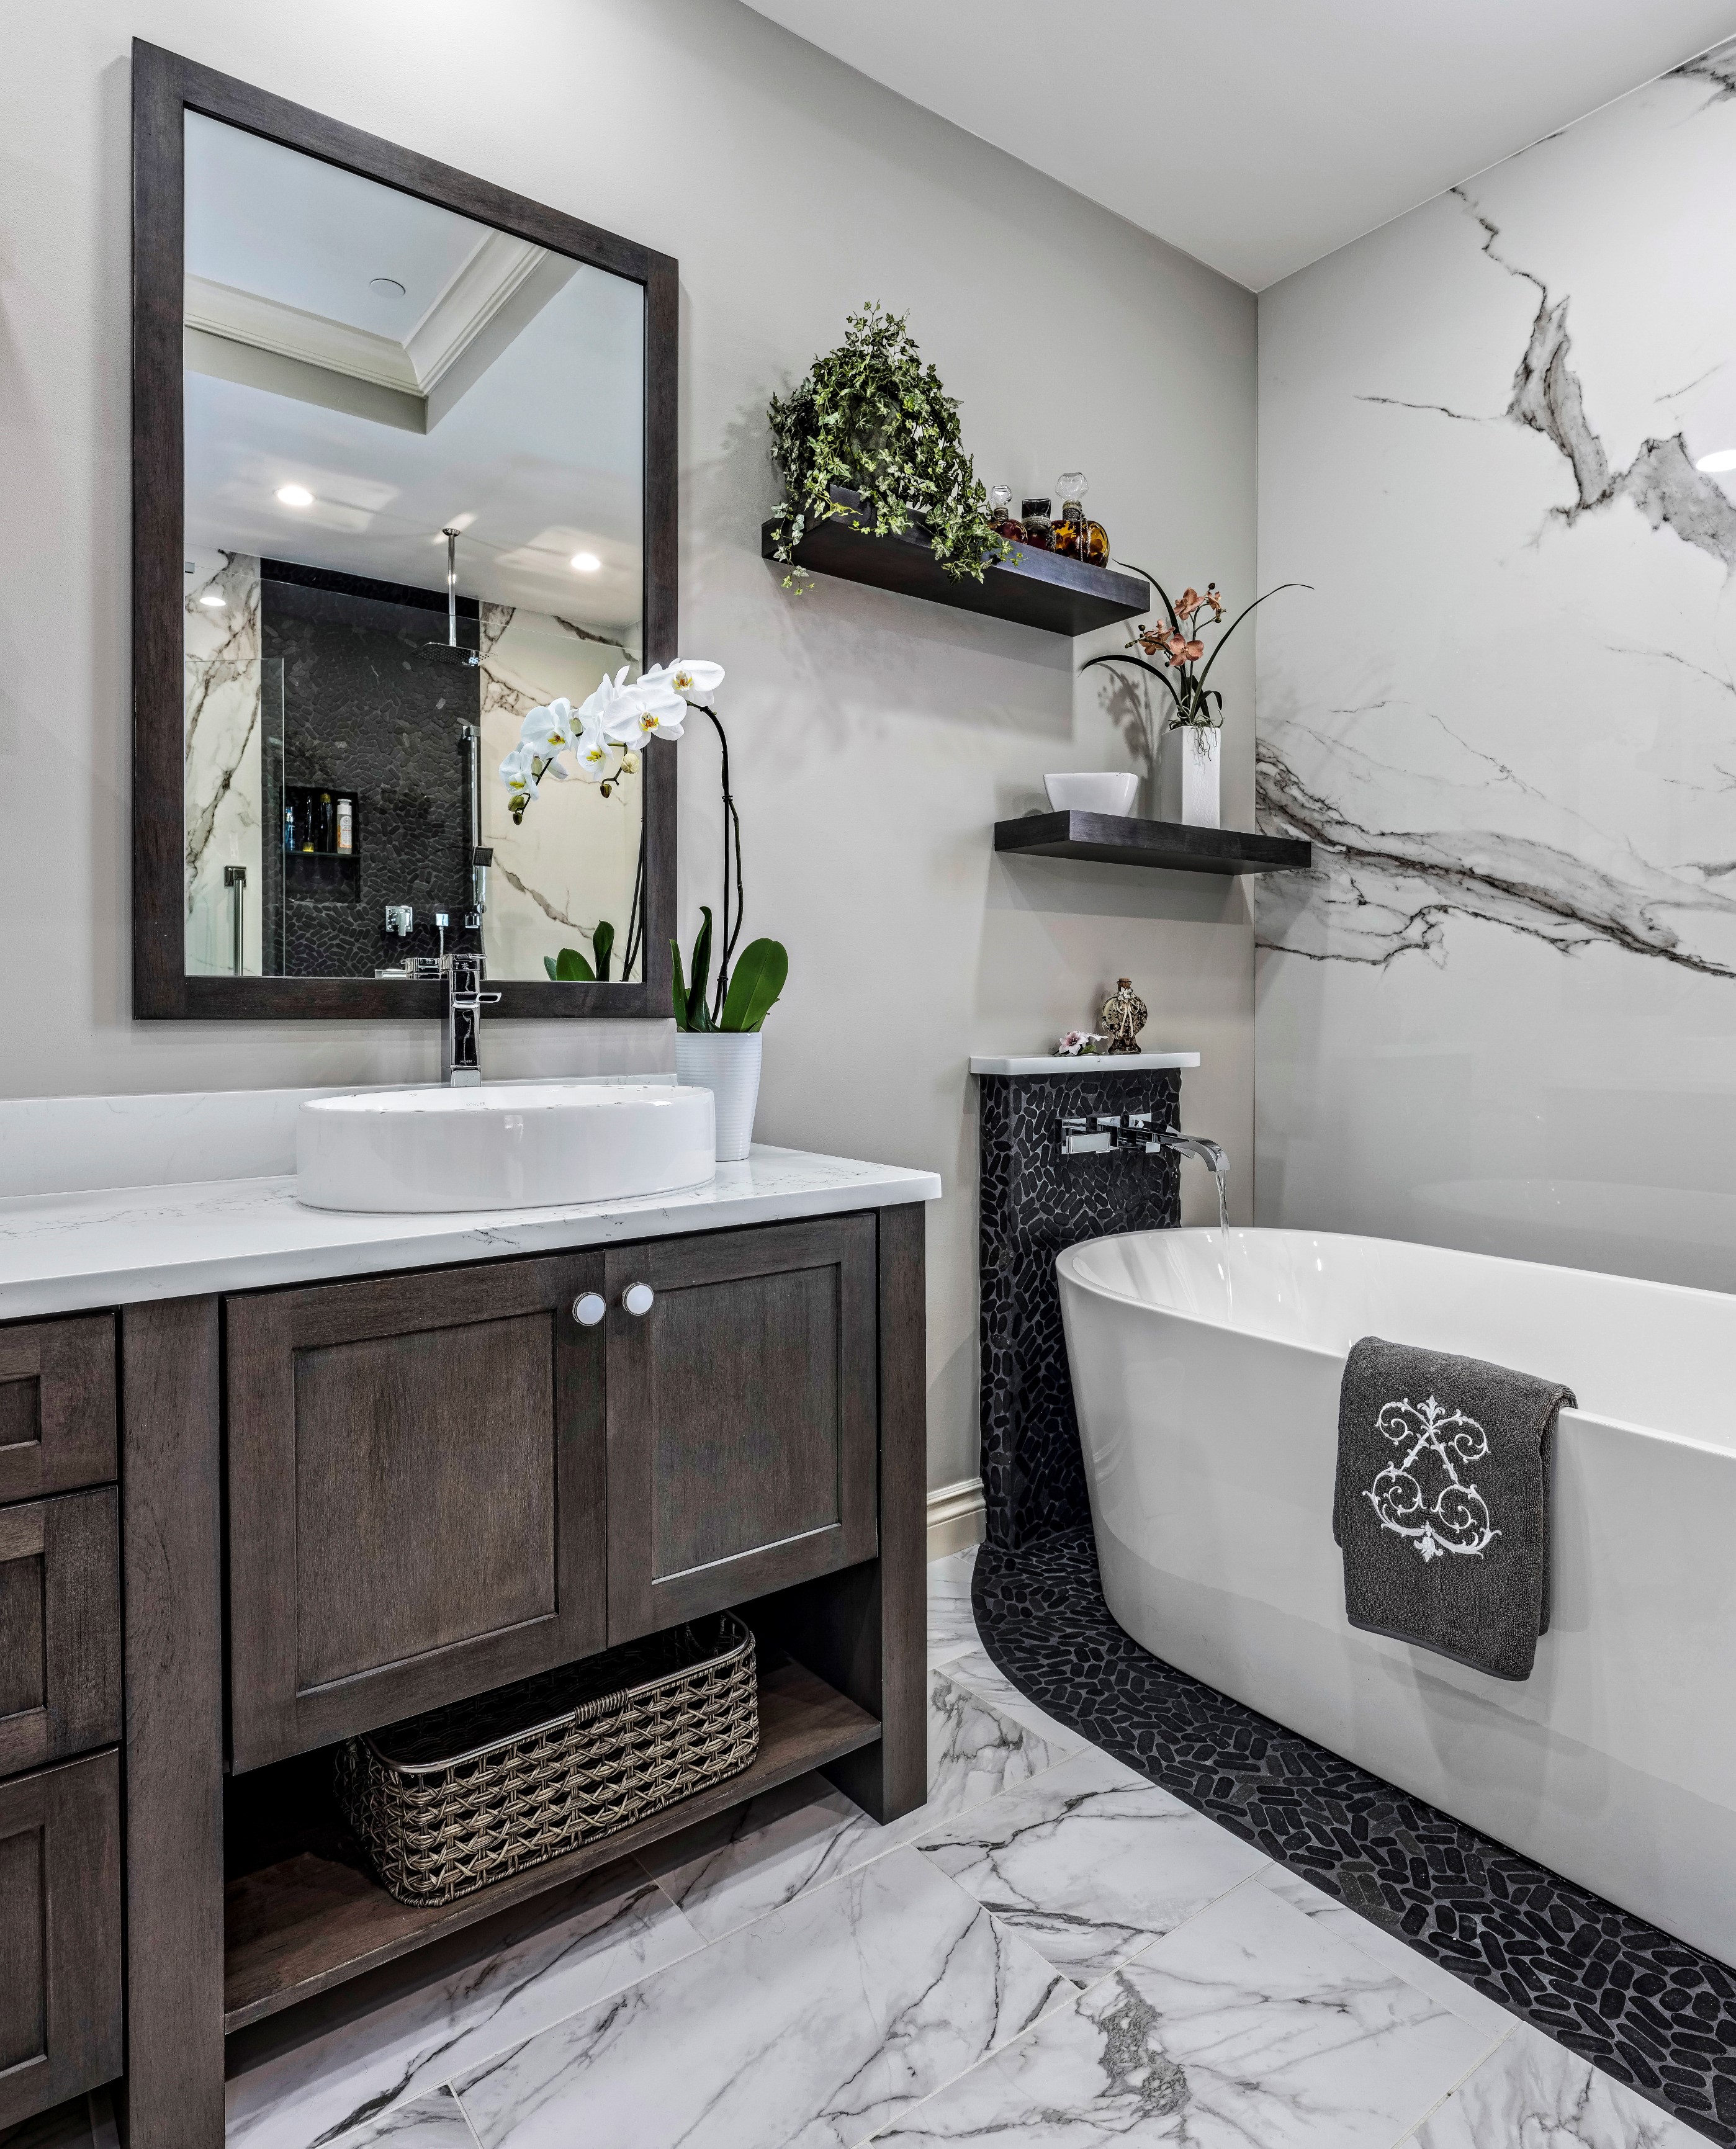 Bathroom Remodeling Typically Cost, How Much Should I Pay For A Bathroom Remodel